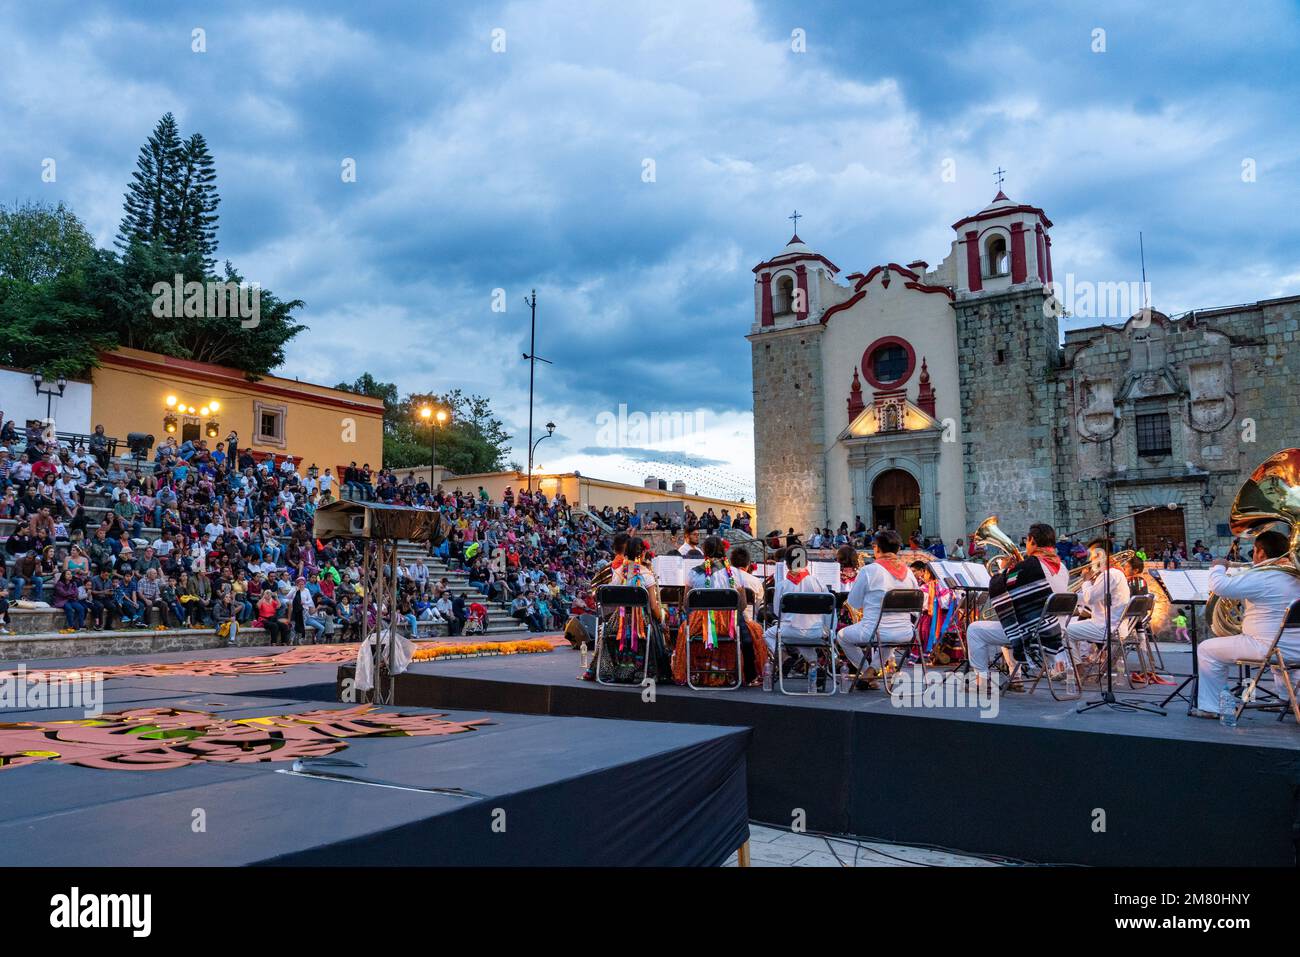 A school orchestra plays a concert on the Plaza de Danza in front of the ex-convent of San Jose in the historic Oaxaca, Mexico. Stock Photo